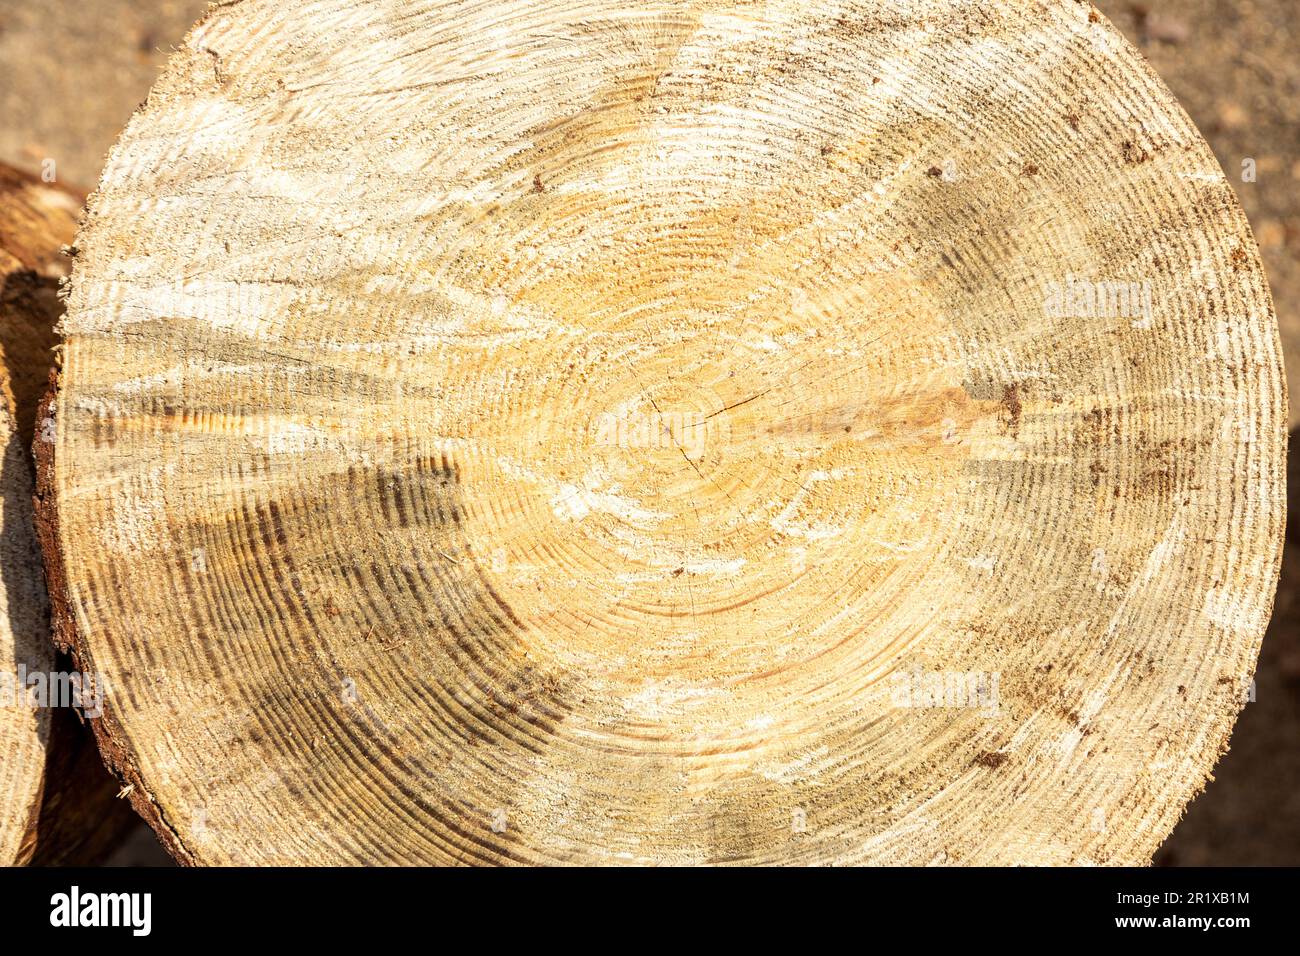 Tree rings on end of cut pine tree. Stock Photo